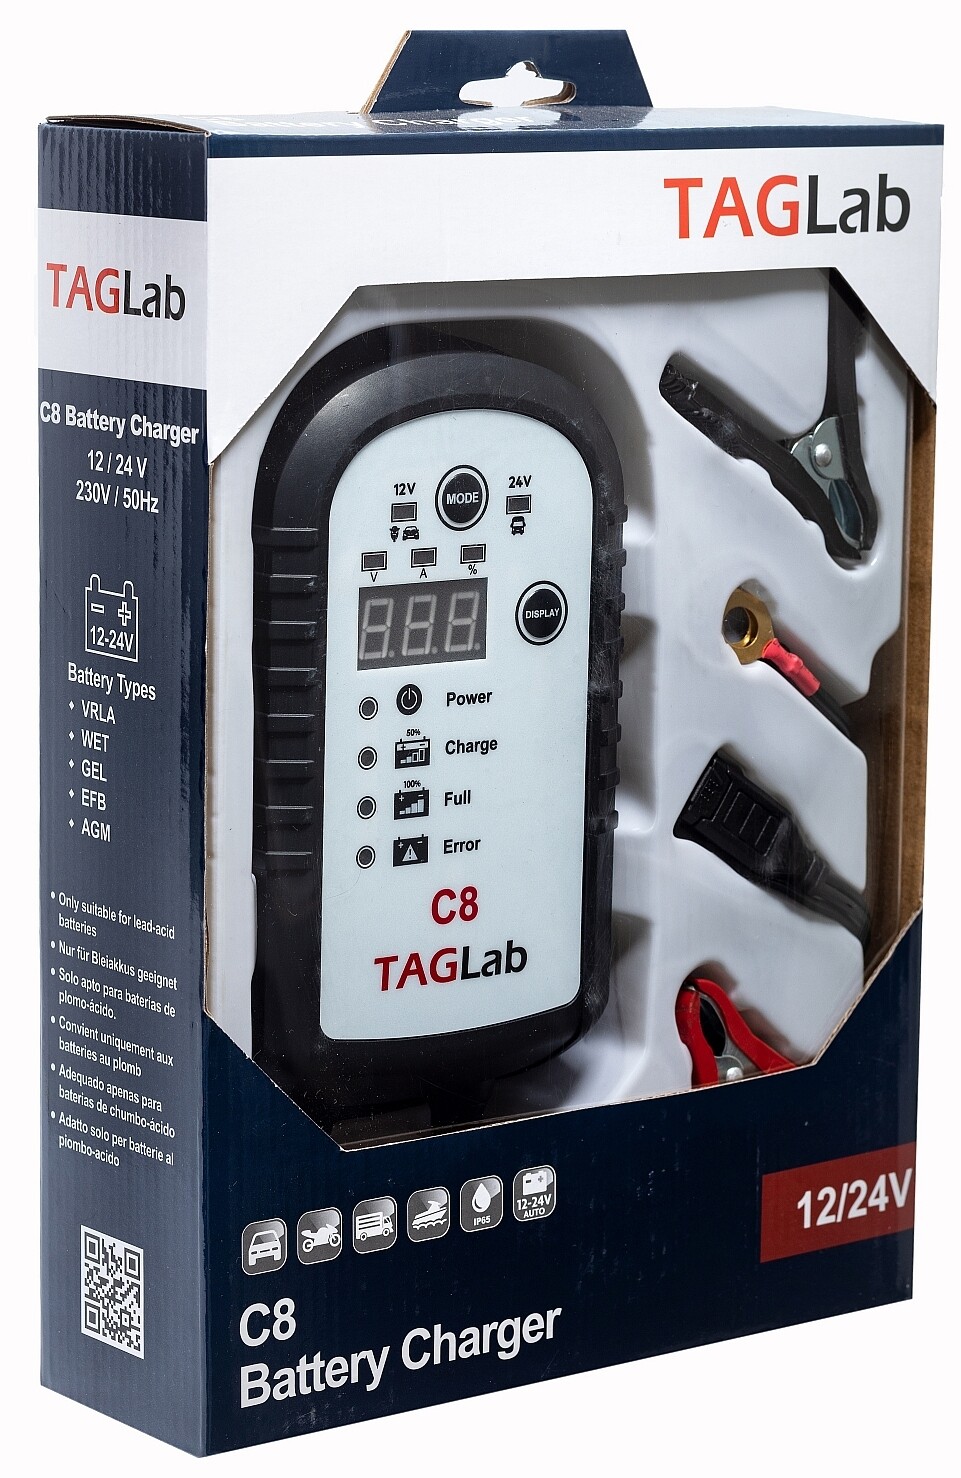 TAGLab C8 Battery Charger with Display - 12V / 24V Smart Charger / Maintainer - Car Bike Suv Truck